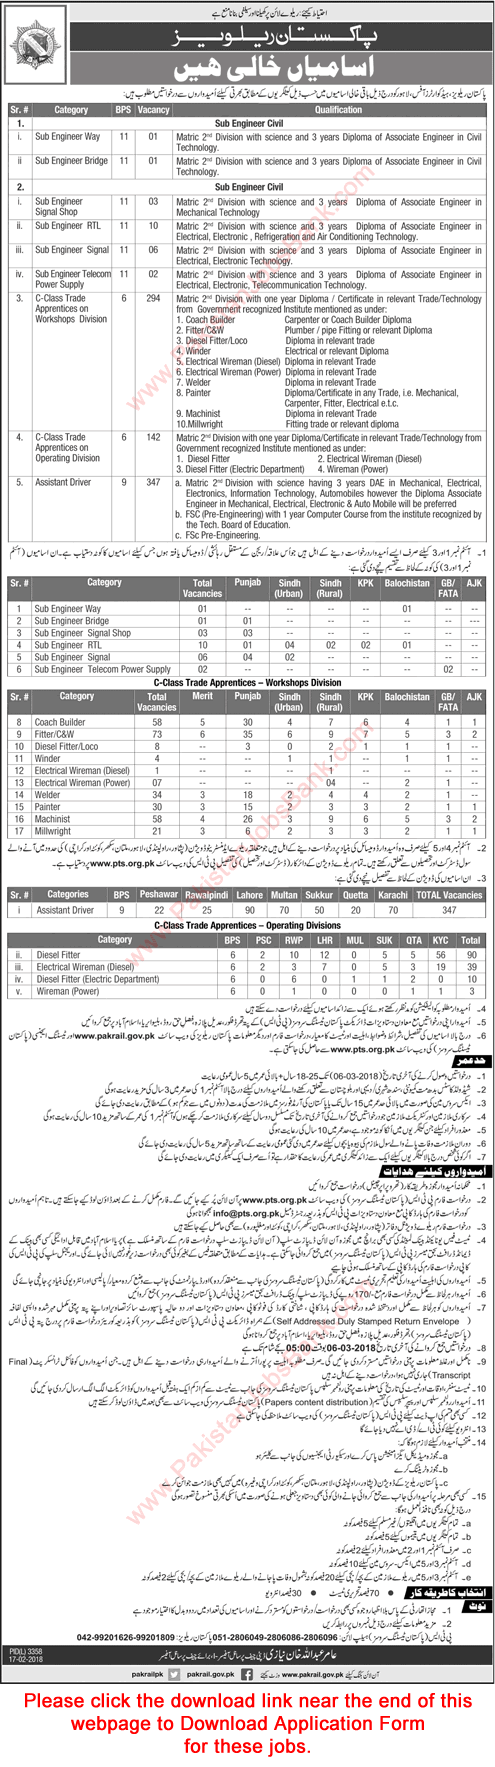 Pakistan Railways Jobs 2018 February PTS Application Form Trade Apprentices, Assistant Drivers & Sub Engineers Latest